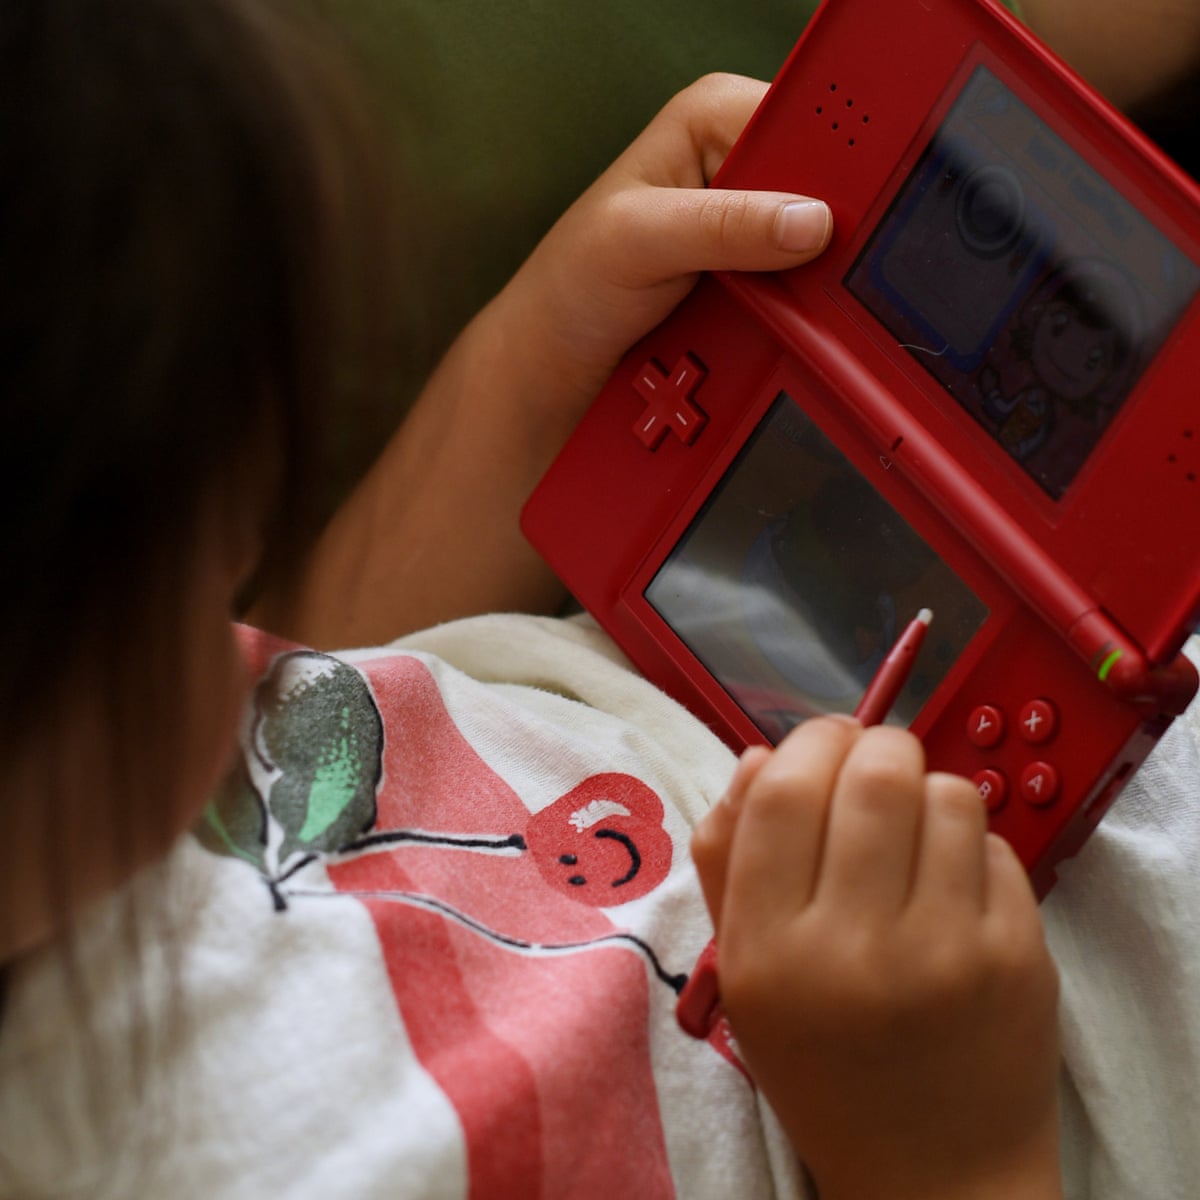 The Nintendo DS was more than just a console – it's part of my